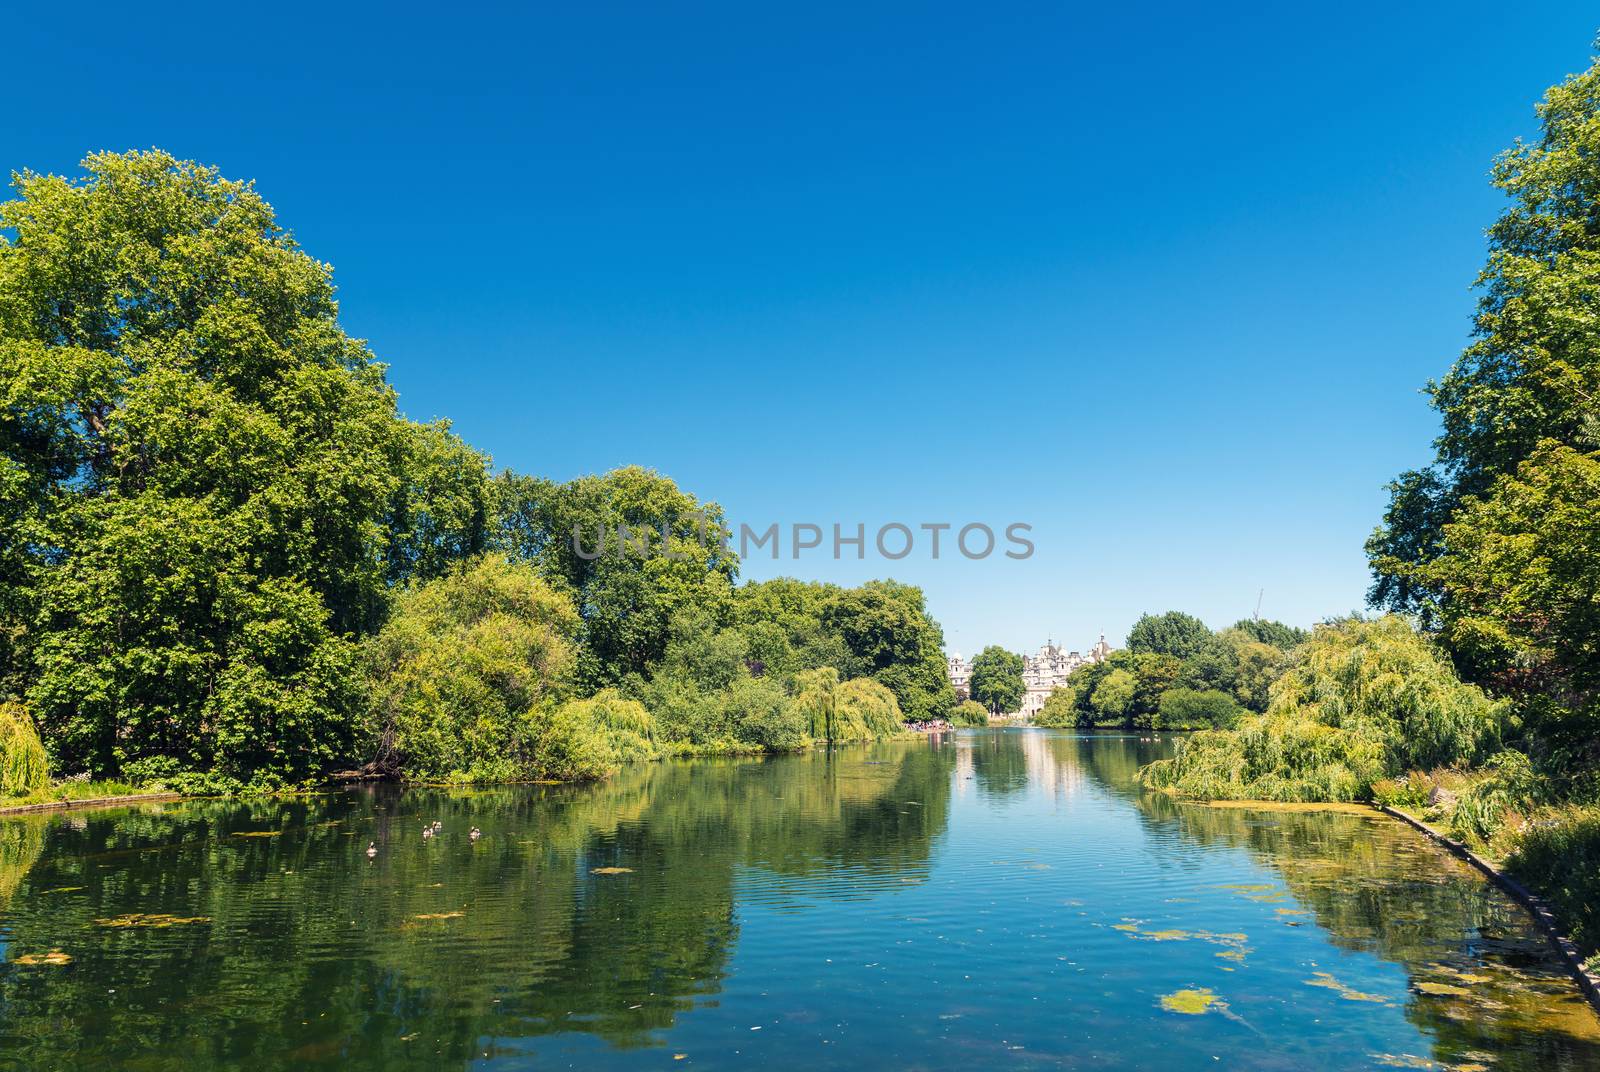 Saint James Park in London on a beautiful summer day.